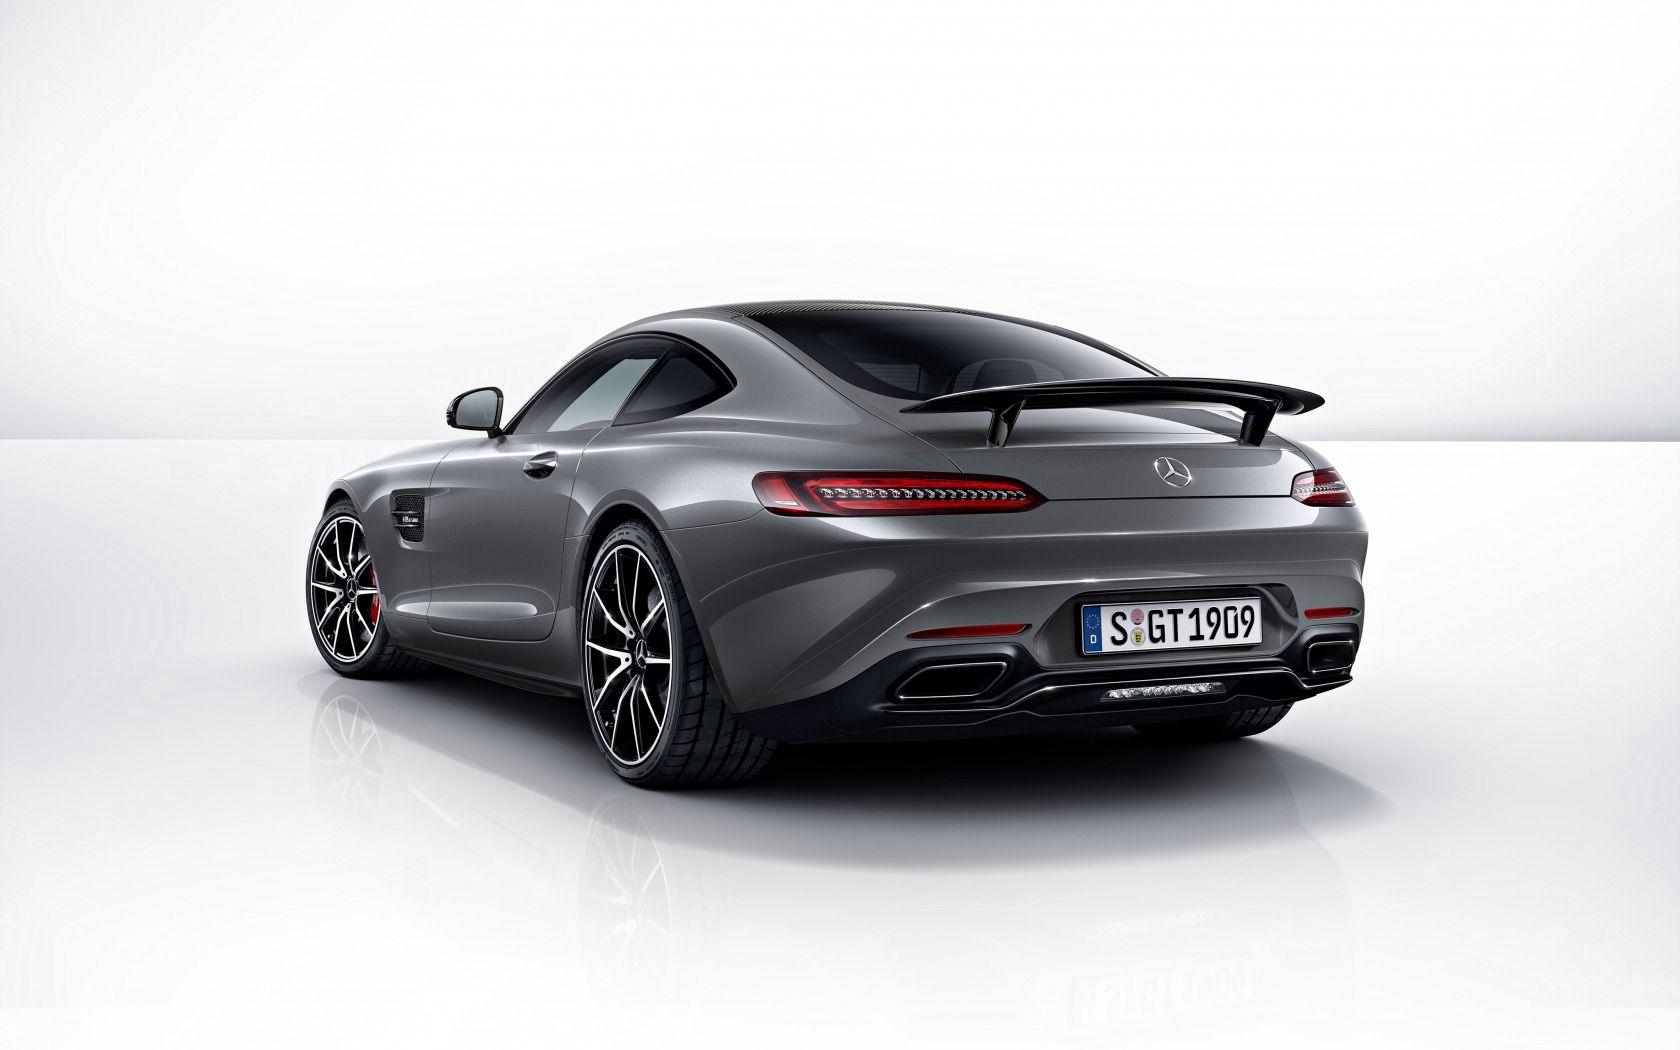 cars, grey, 2014, back view, rear view, amg, mercedes, gt, edition 1